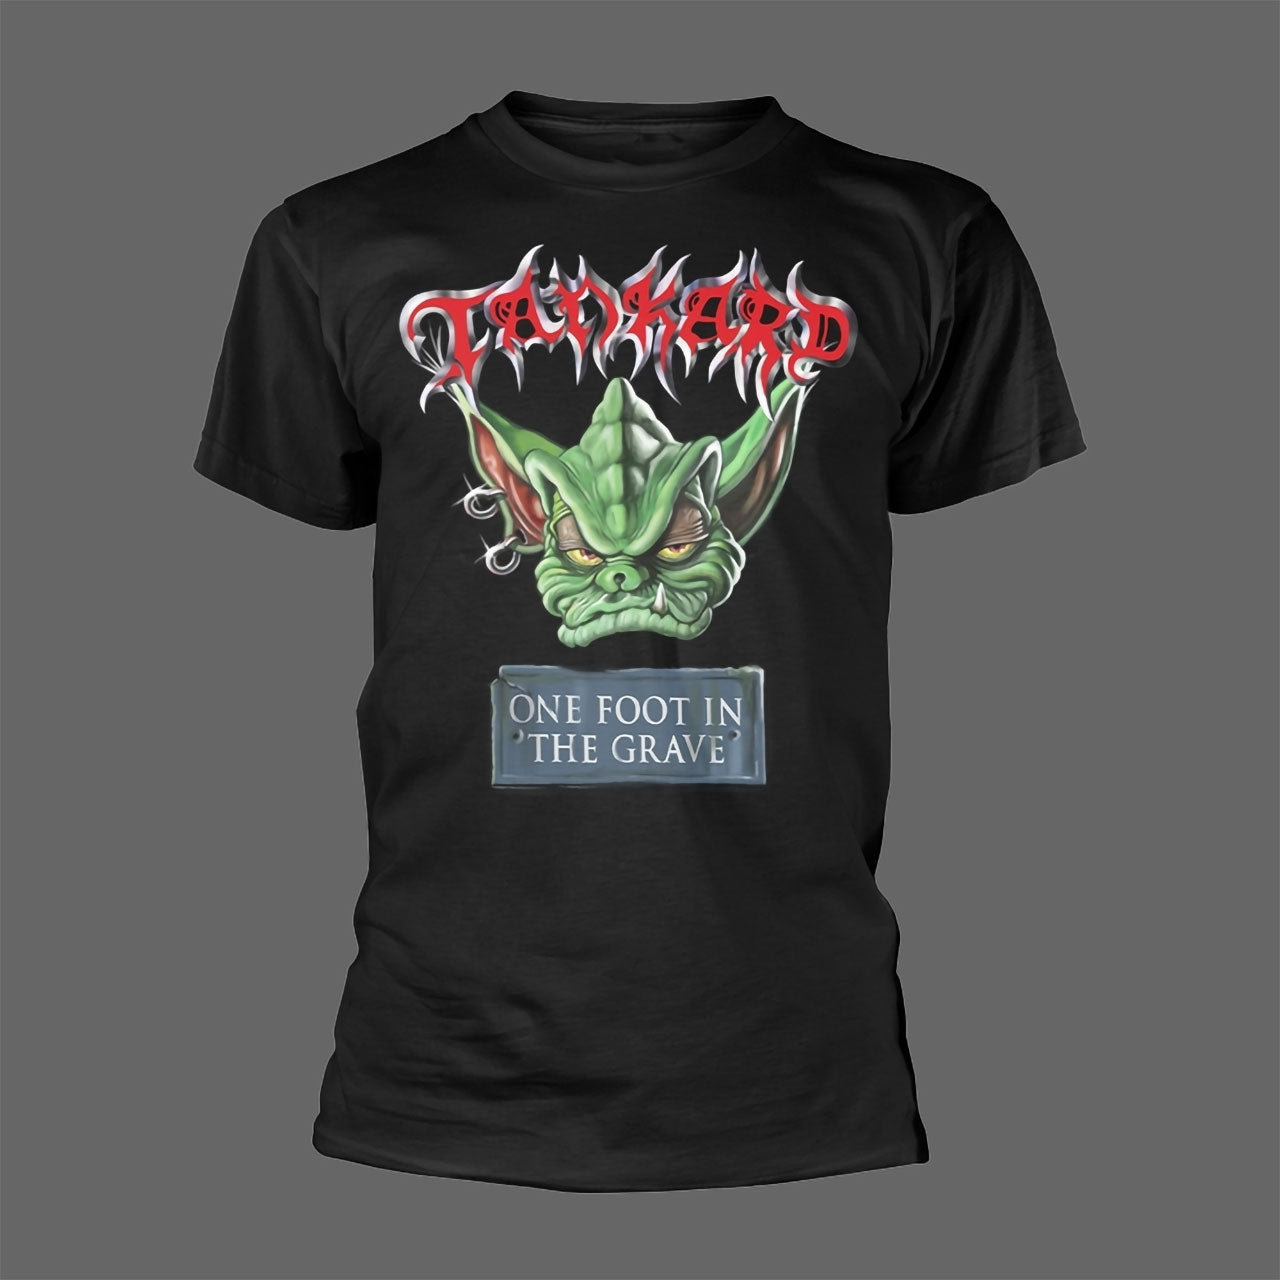 Tankard - One Foot in the Grave (T-Shirt)